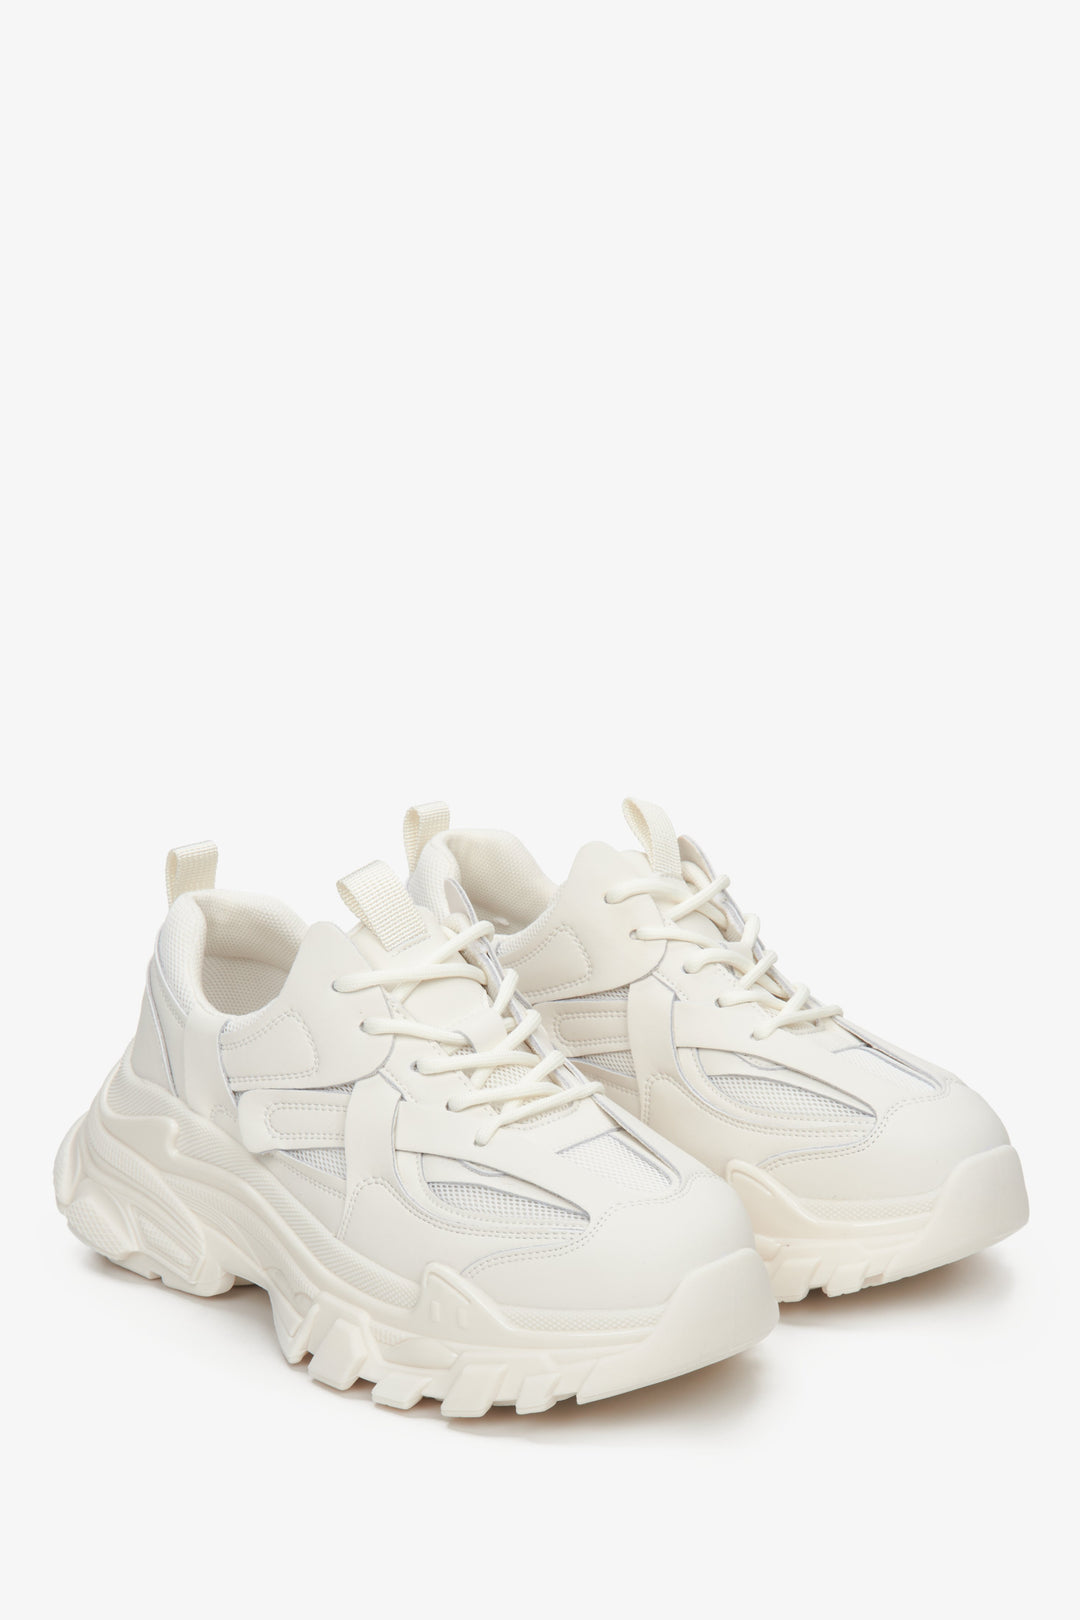 Women's sneakers from the sporty ES 8 line in white, suitable for spring and autumn.